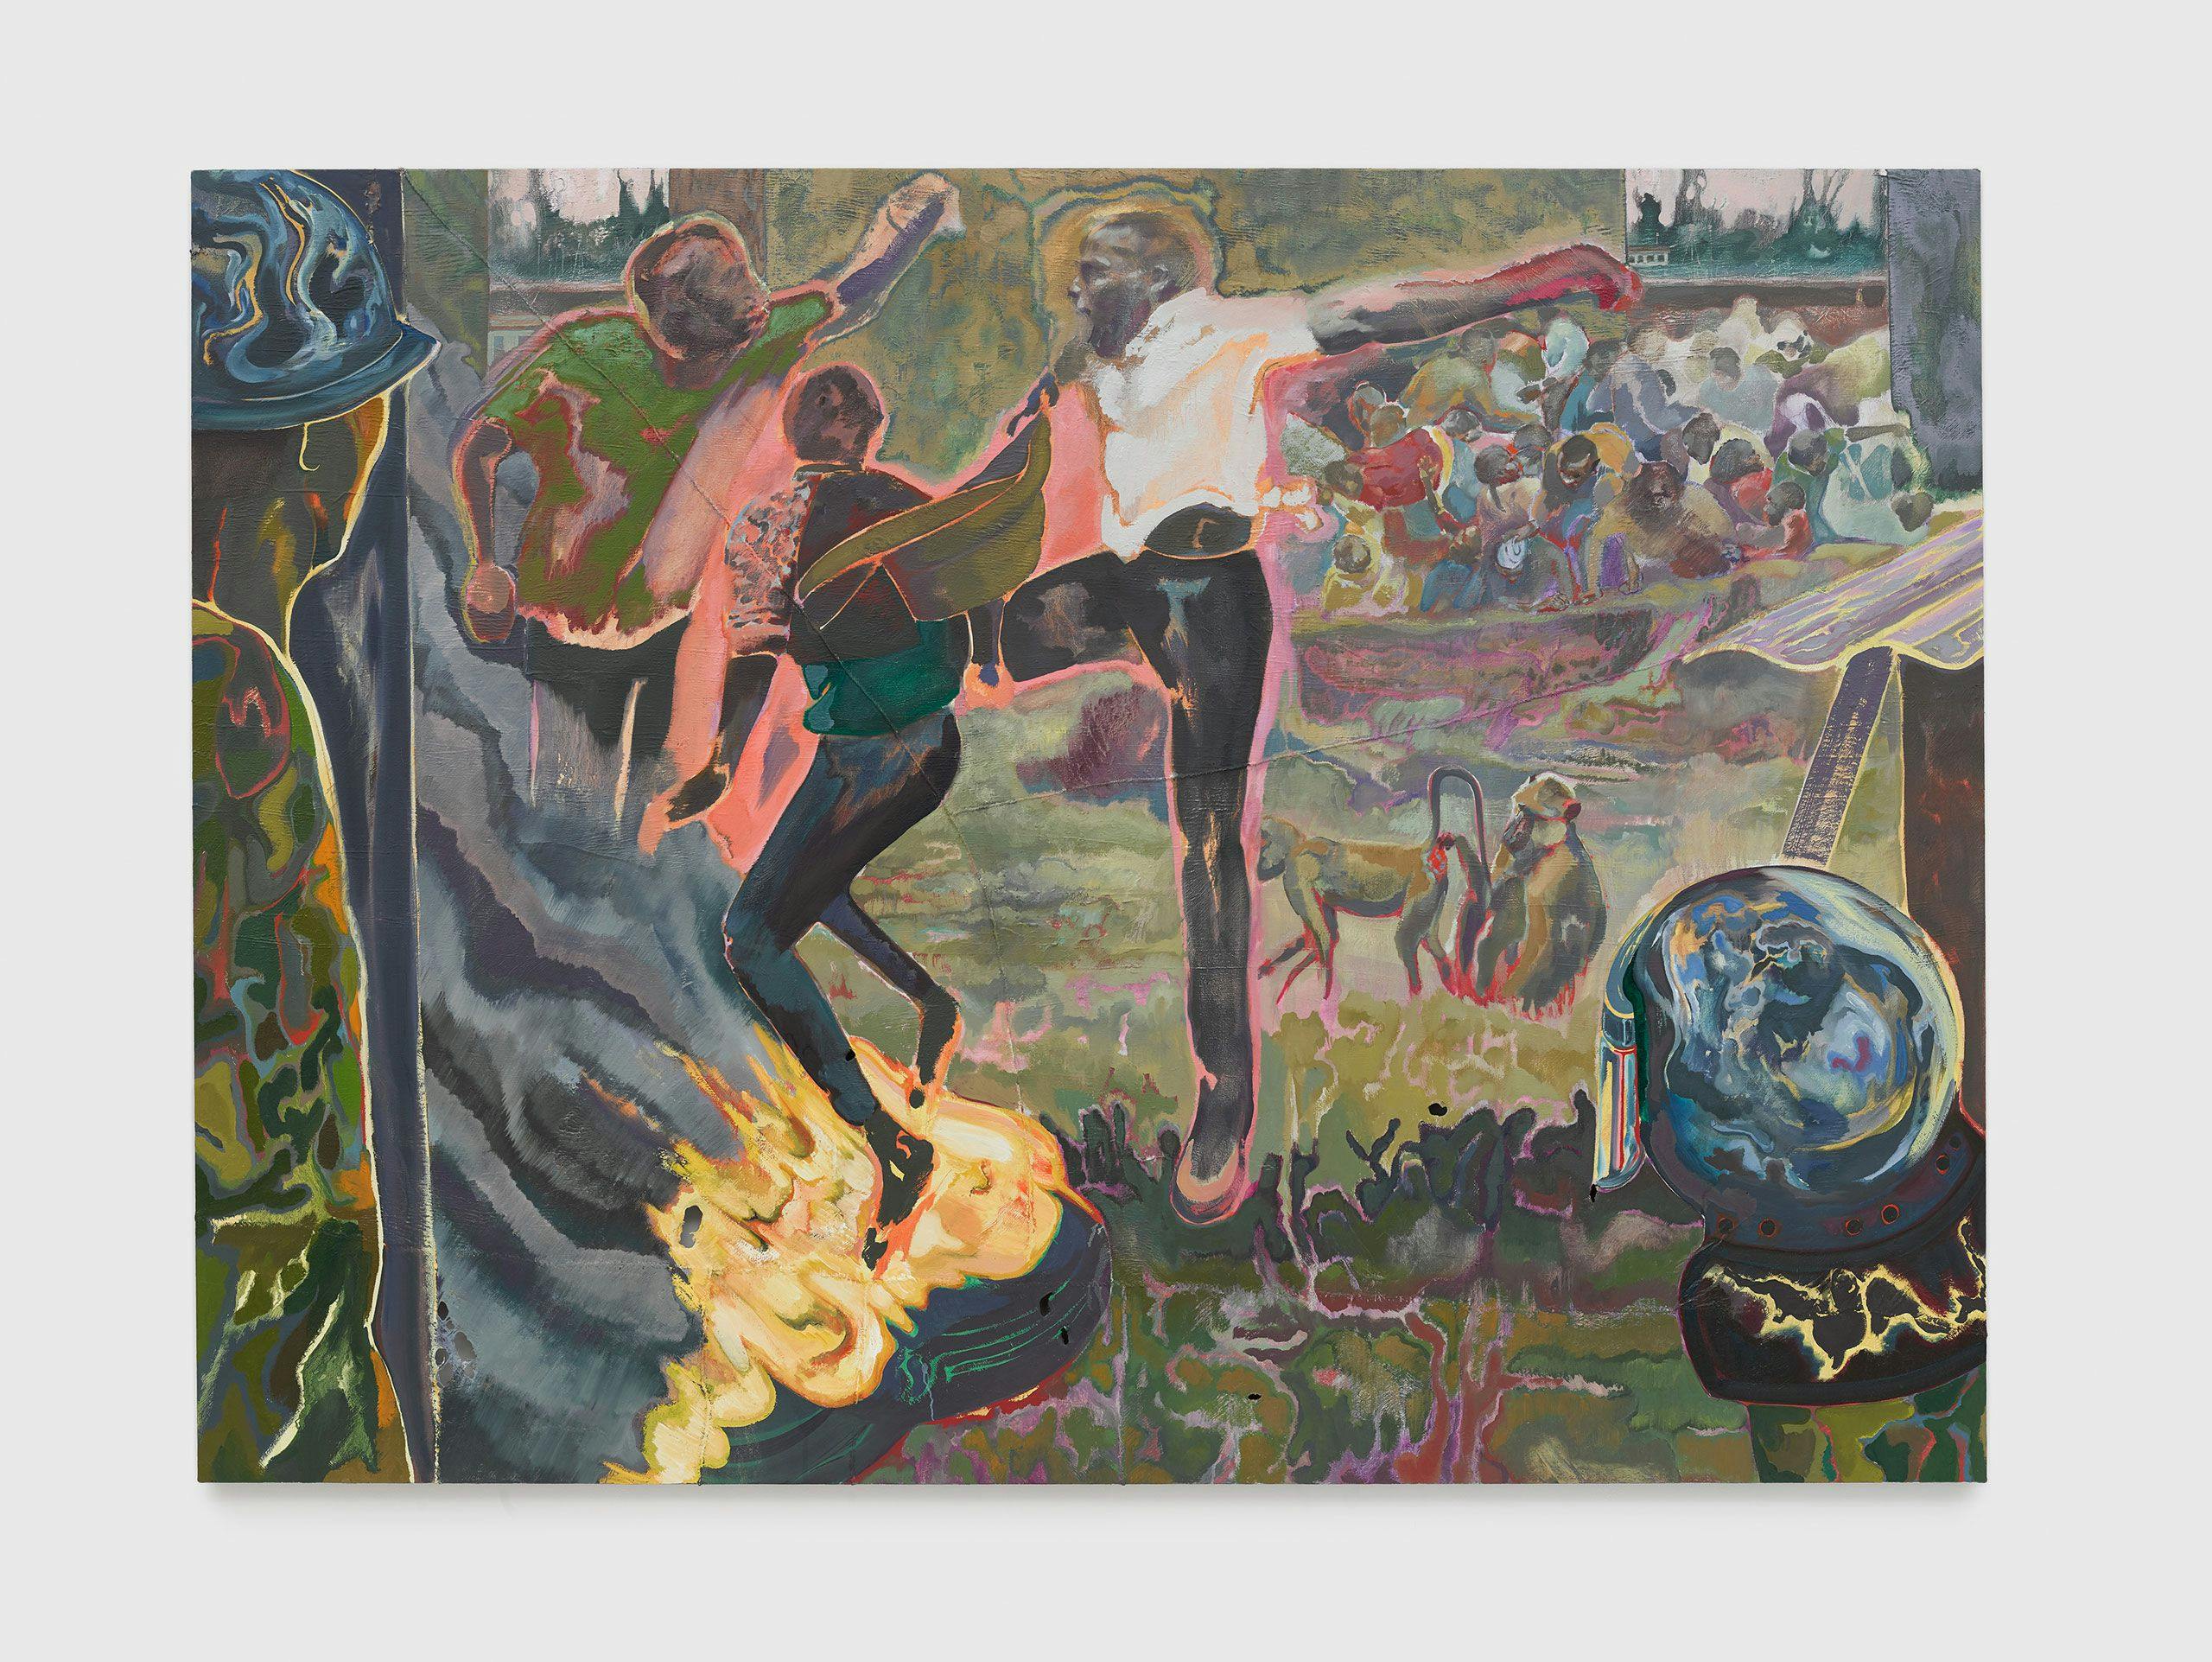 An oil on Lubugo bark cloth by Michael Armitage, titled The Accomplice, dated 2019.